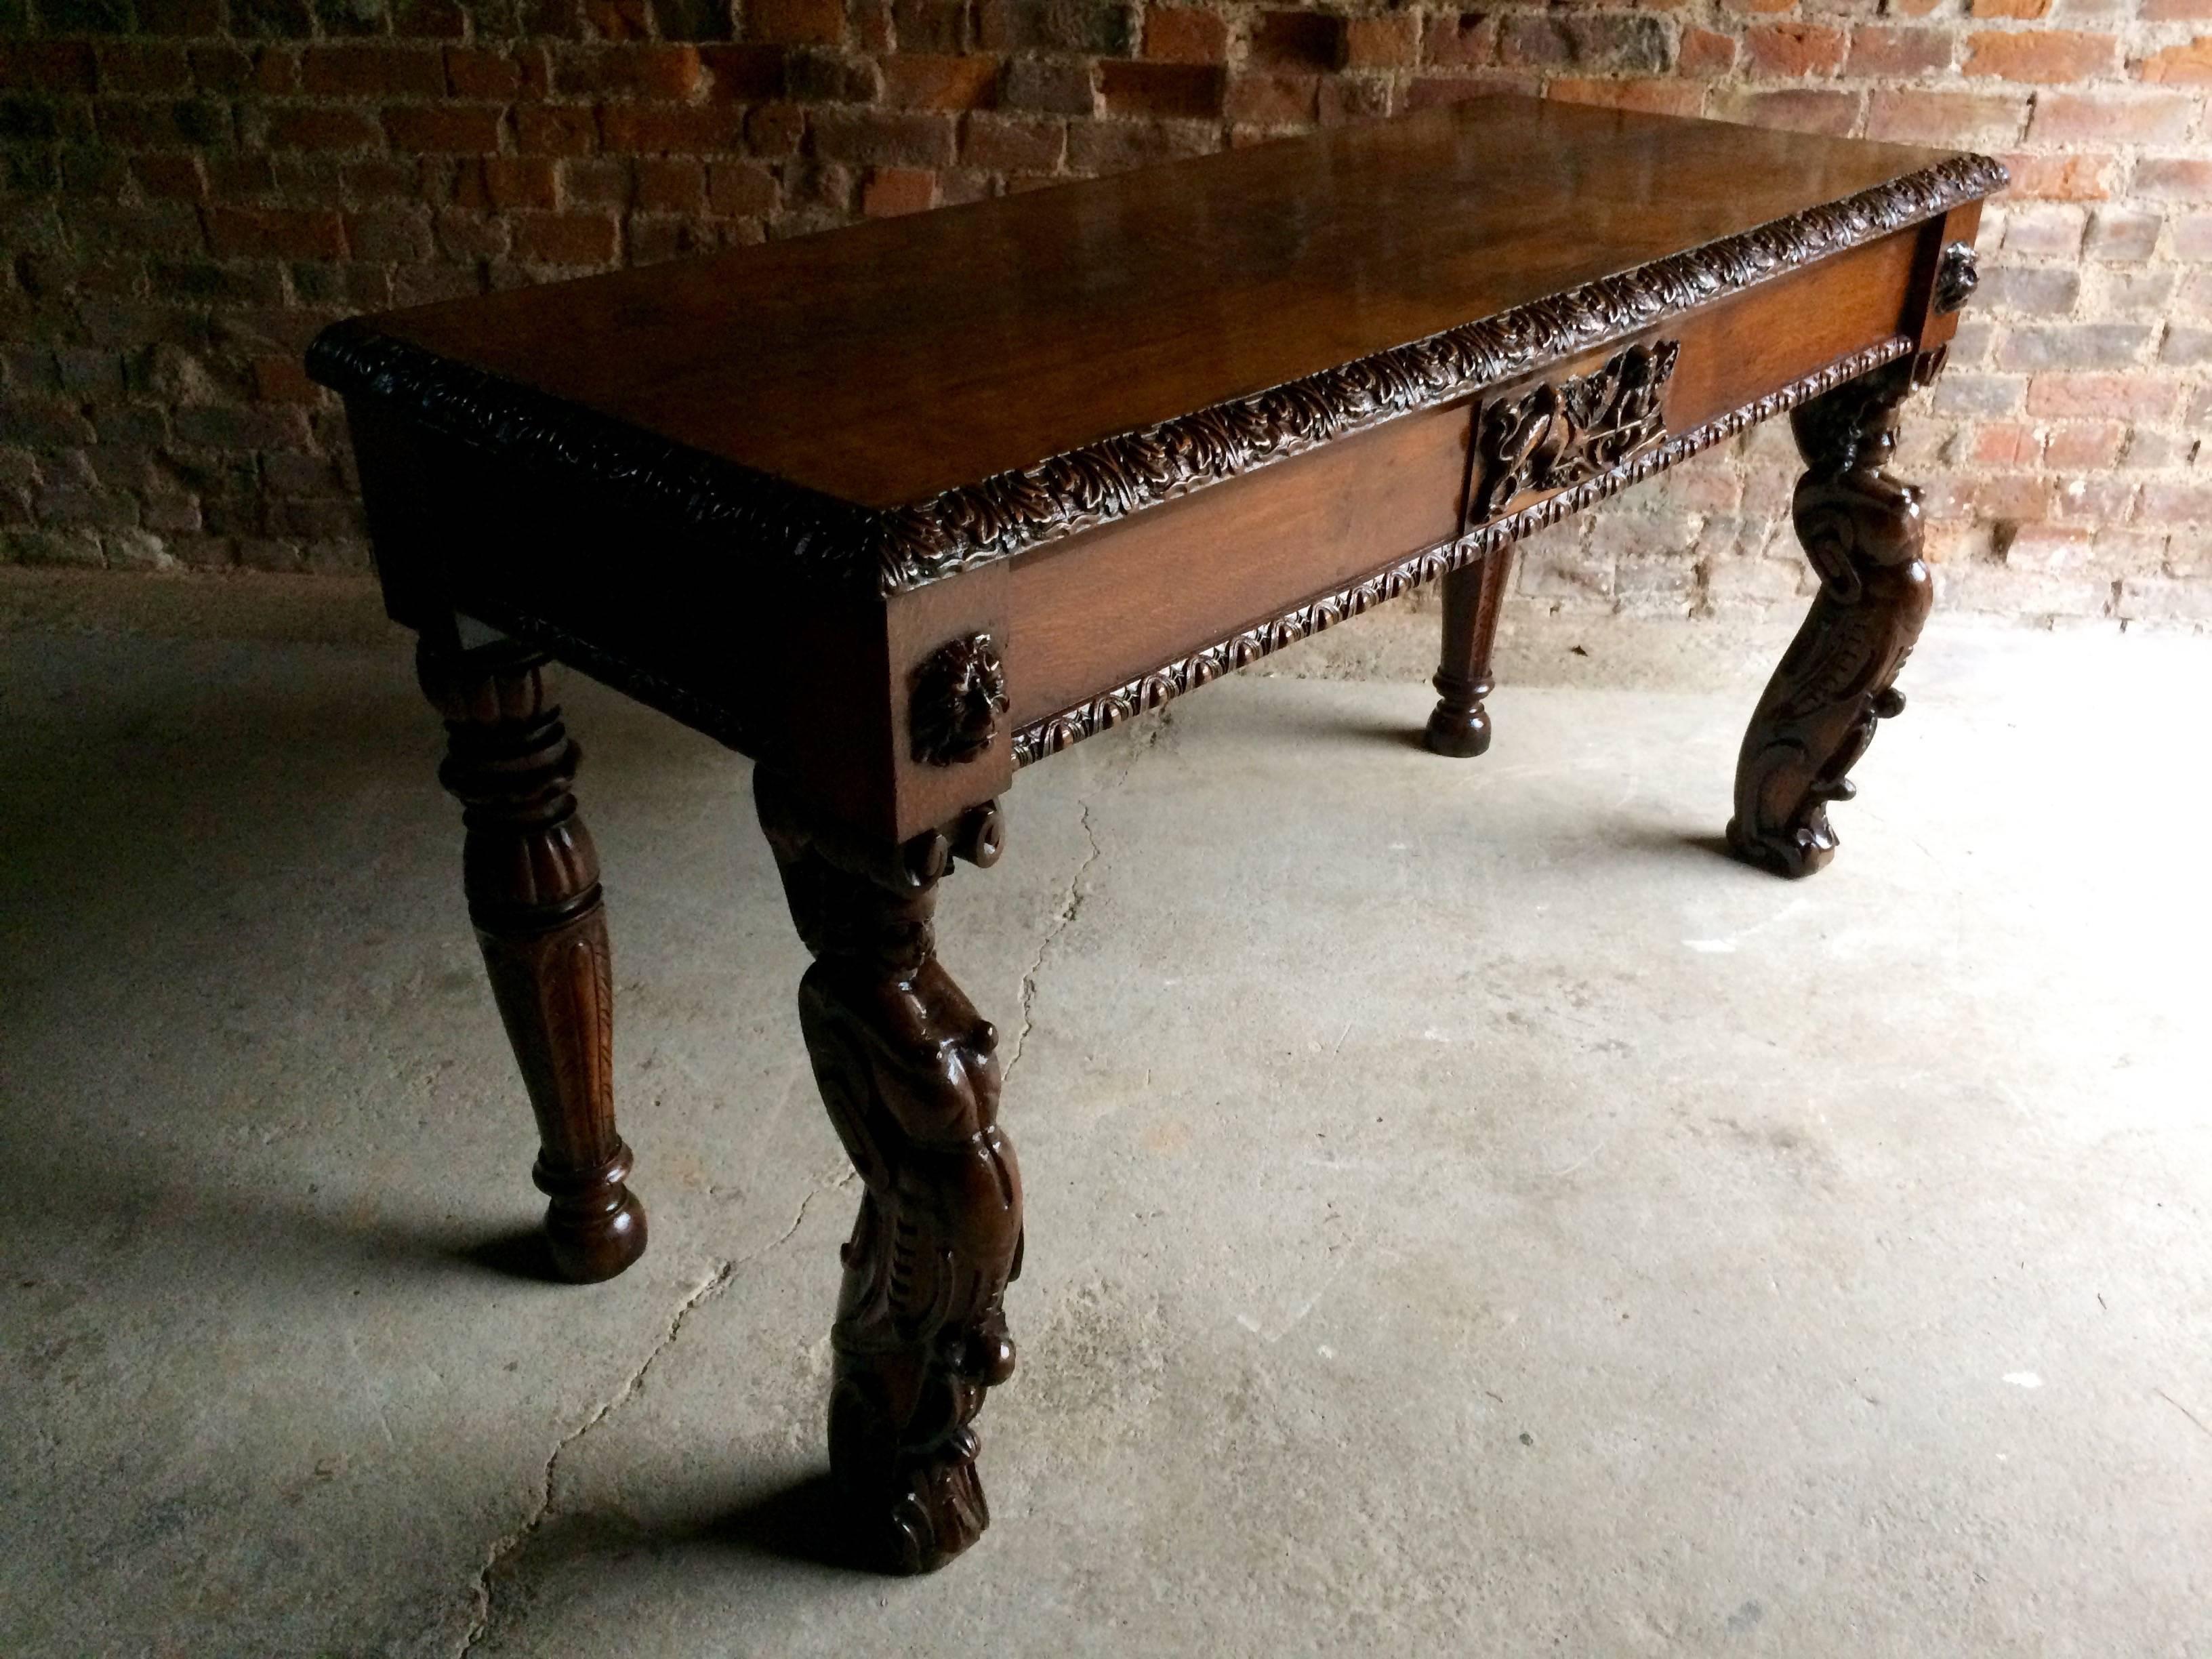 A beautiful antique 19th Century profusely carved Victorian Gothic style oak hall table, with a beautiful aged patina, offered in excellent condition. The hall table having rectangular top with carved border and central carving of a cherub, with